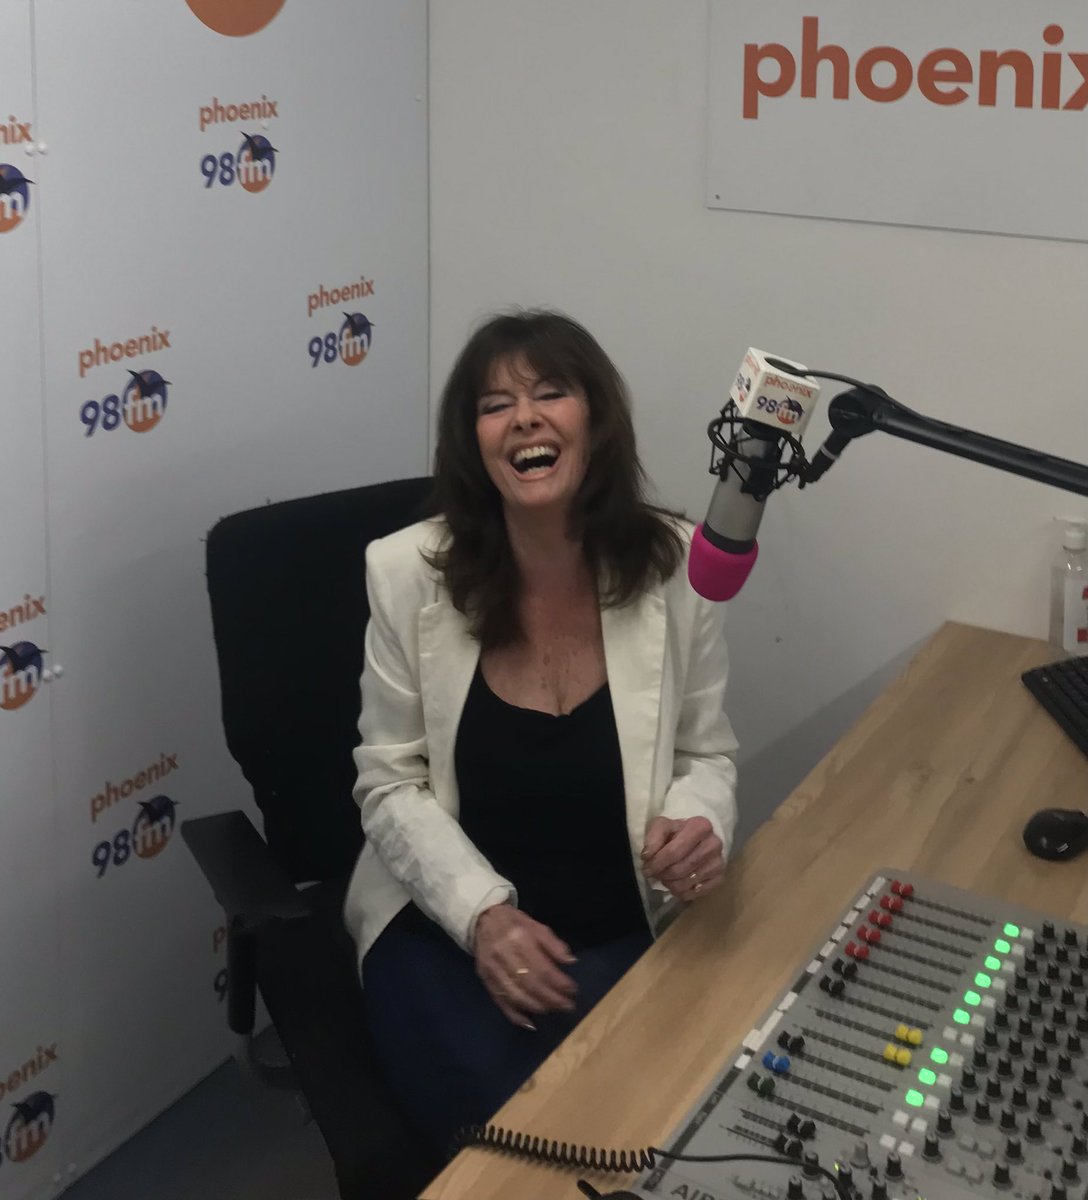 Vix Mix Sunday 2-4 pm Phoenix 98fm with fab Tony Smith. Join me for great music and fun facts. Let’s have a laugh See you there Fabulous people @phoenixfm @paulvgolder @DjTonysat #SaturdayVibes